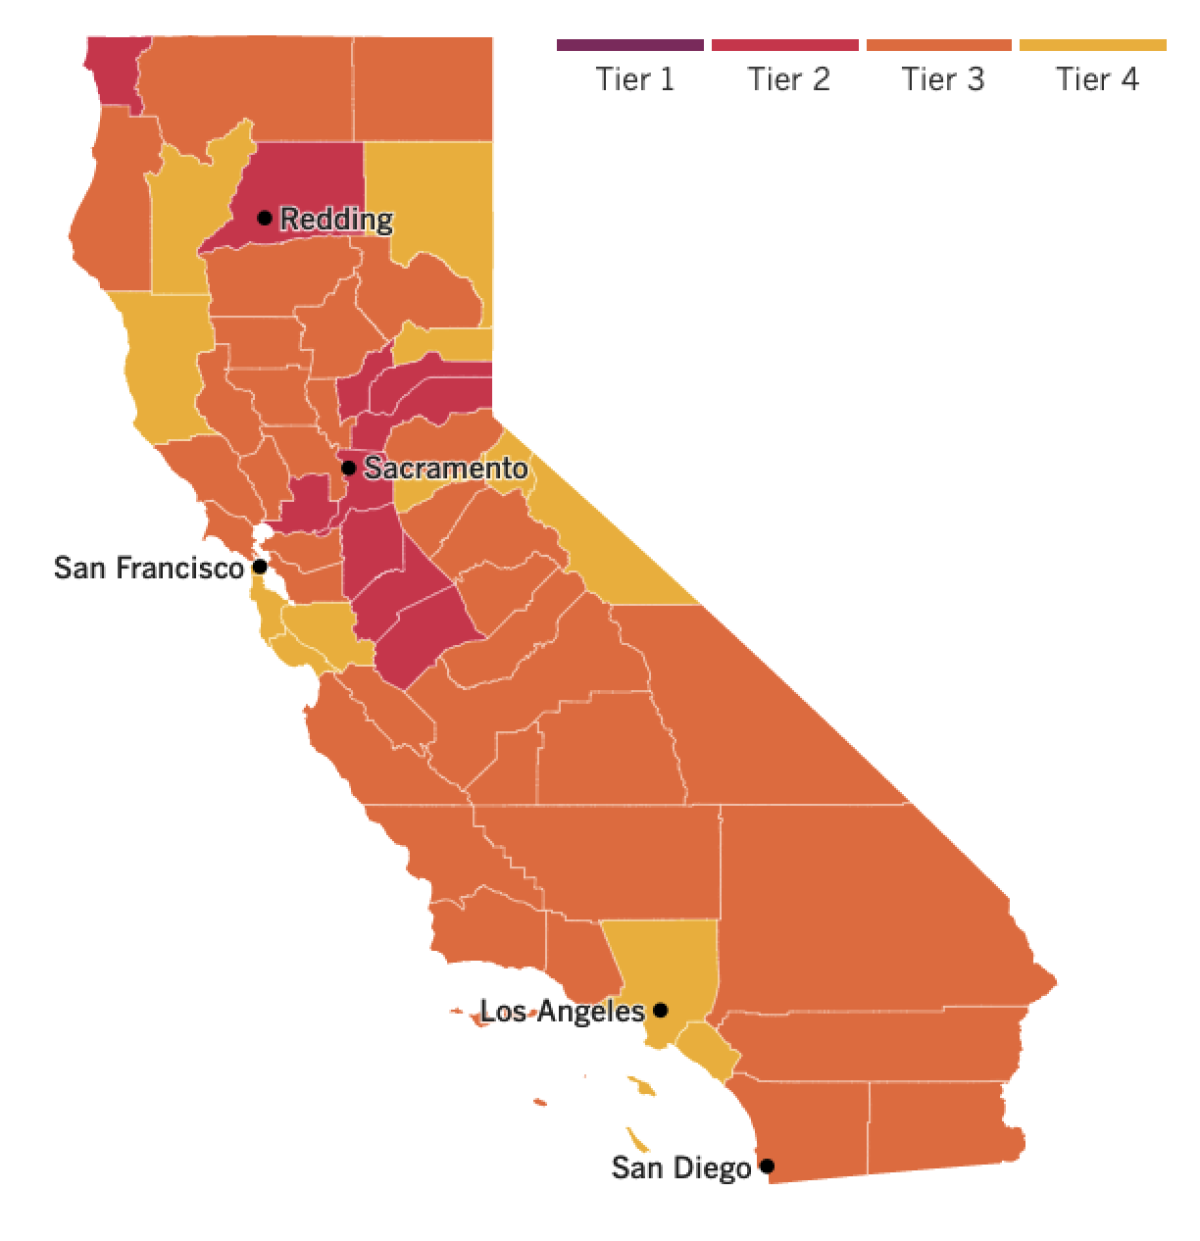 A map of California showing most counties in Tier 3  and some in Tier 2 and Tier 4